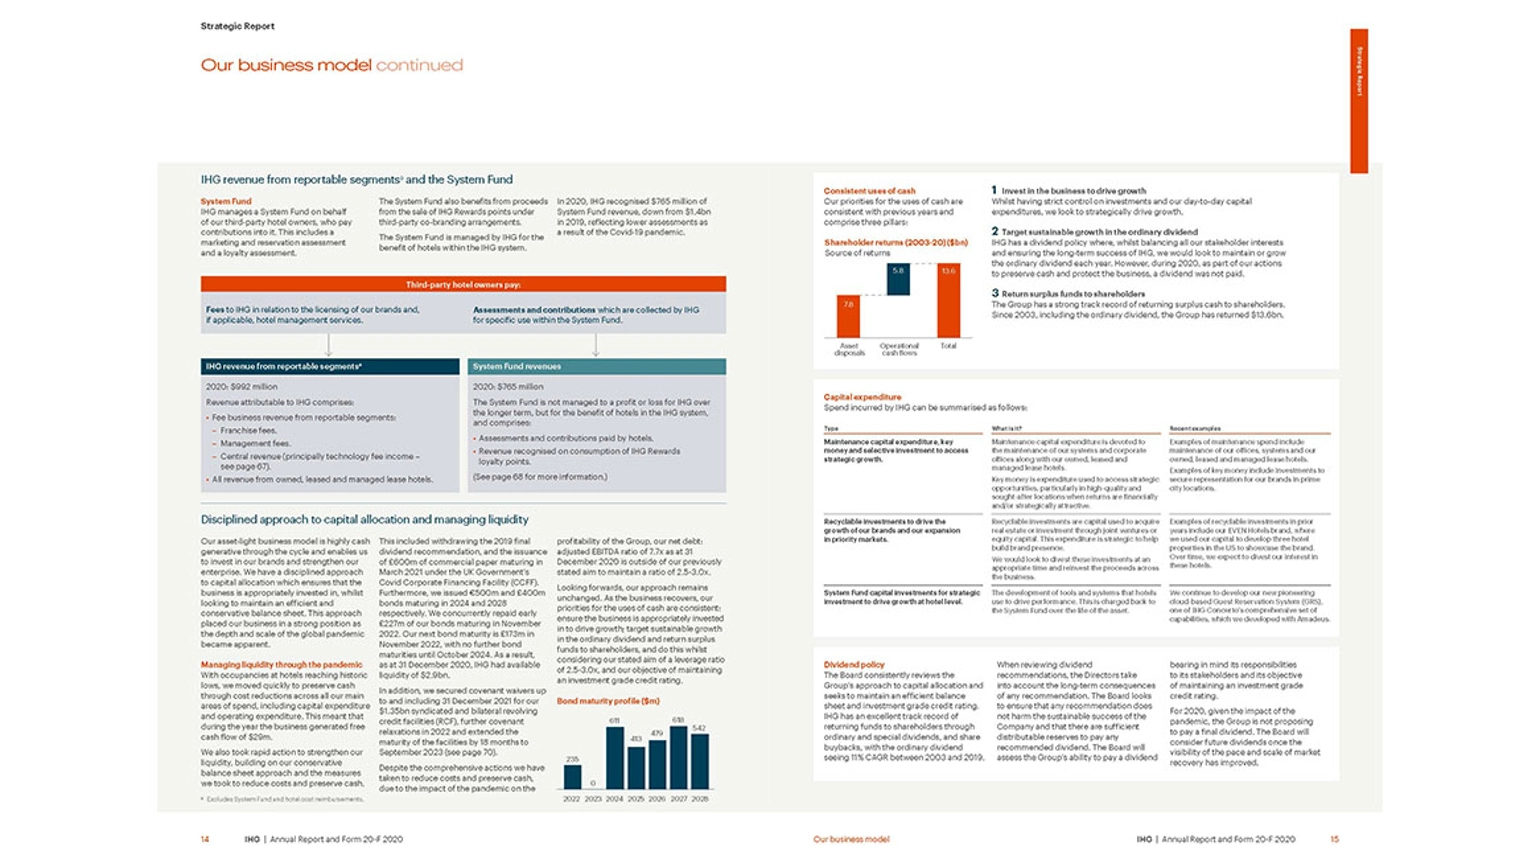 Pages from IHG's annual report, featuring details about its business model